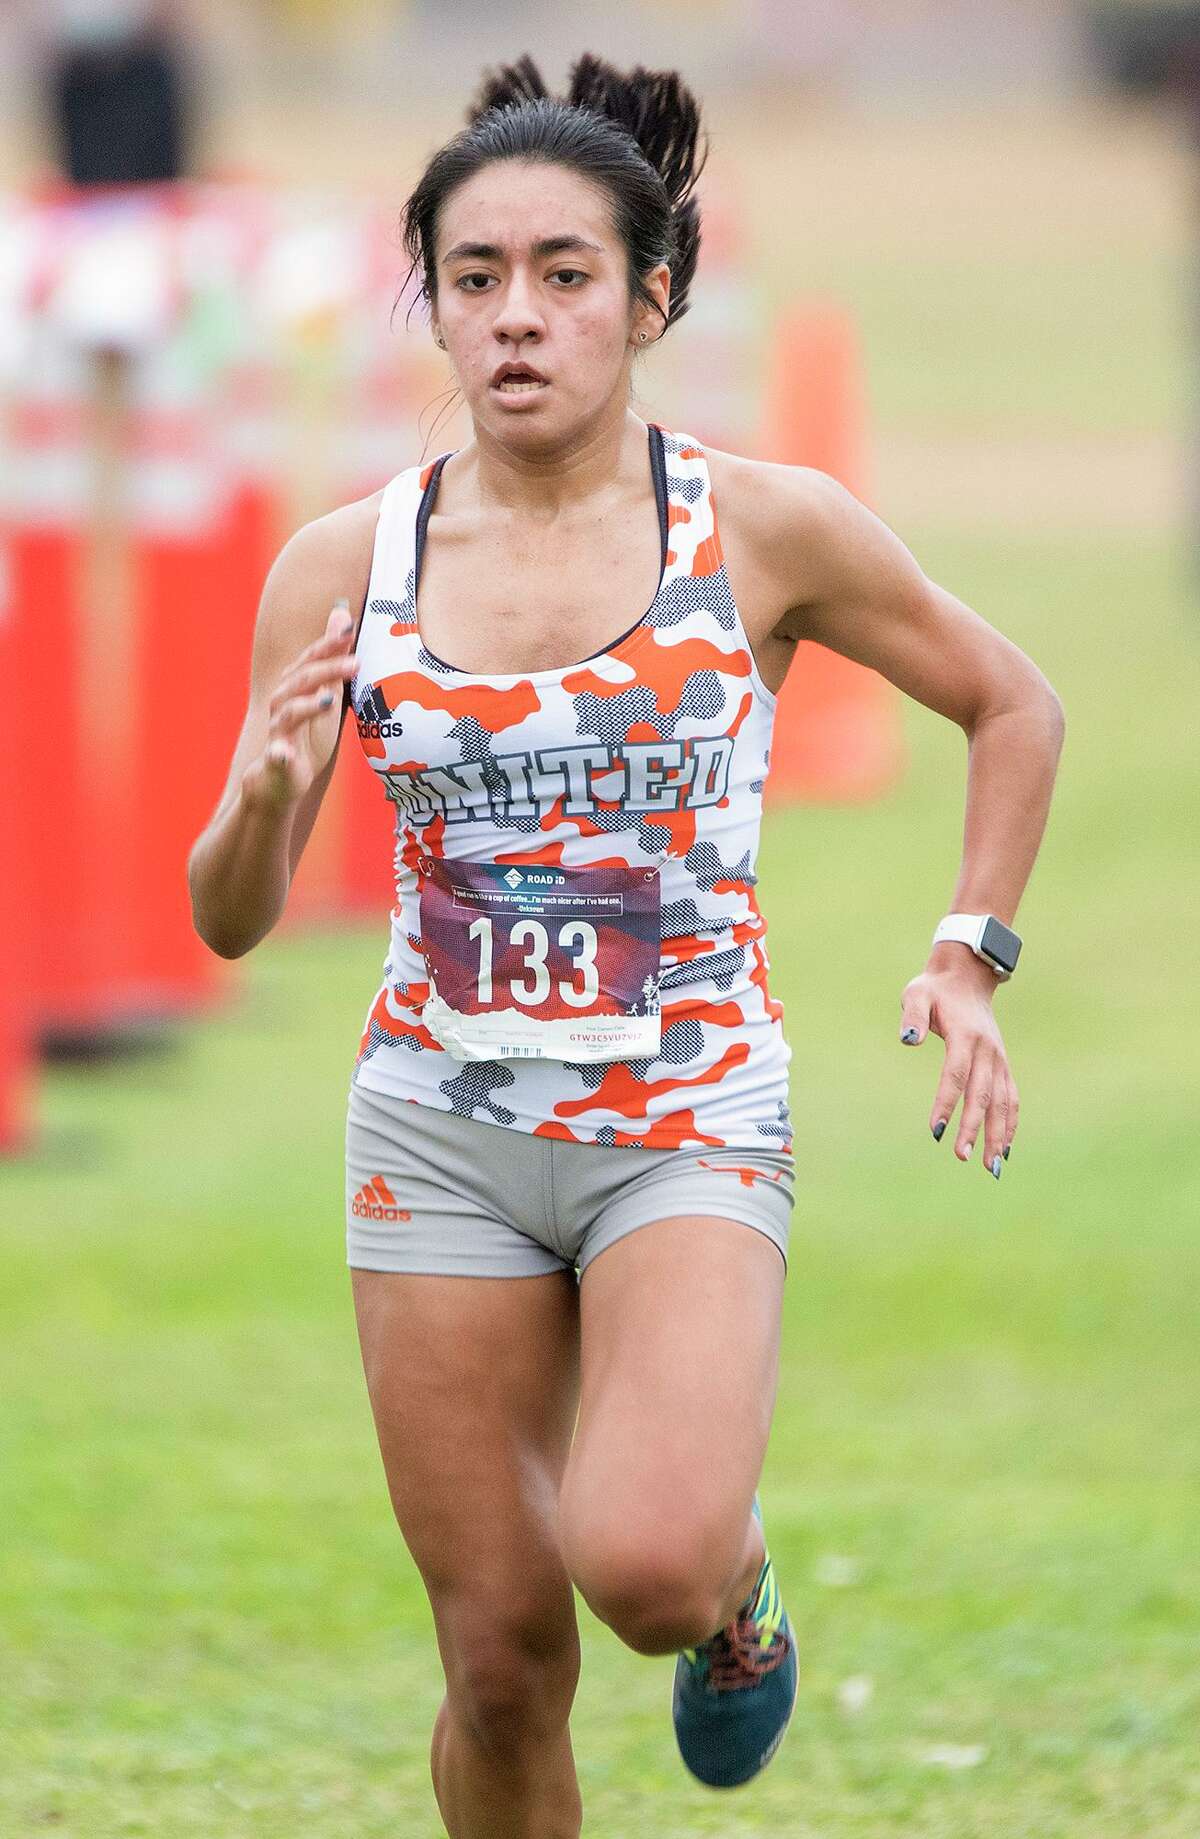 United’s Valerie Garcia is aiming to build off a strong junior season in which she qualified for the state meet.